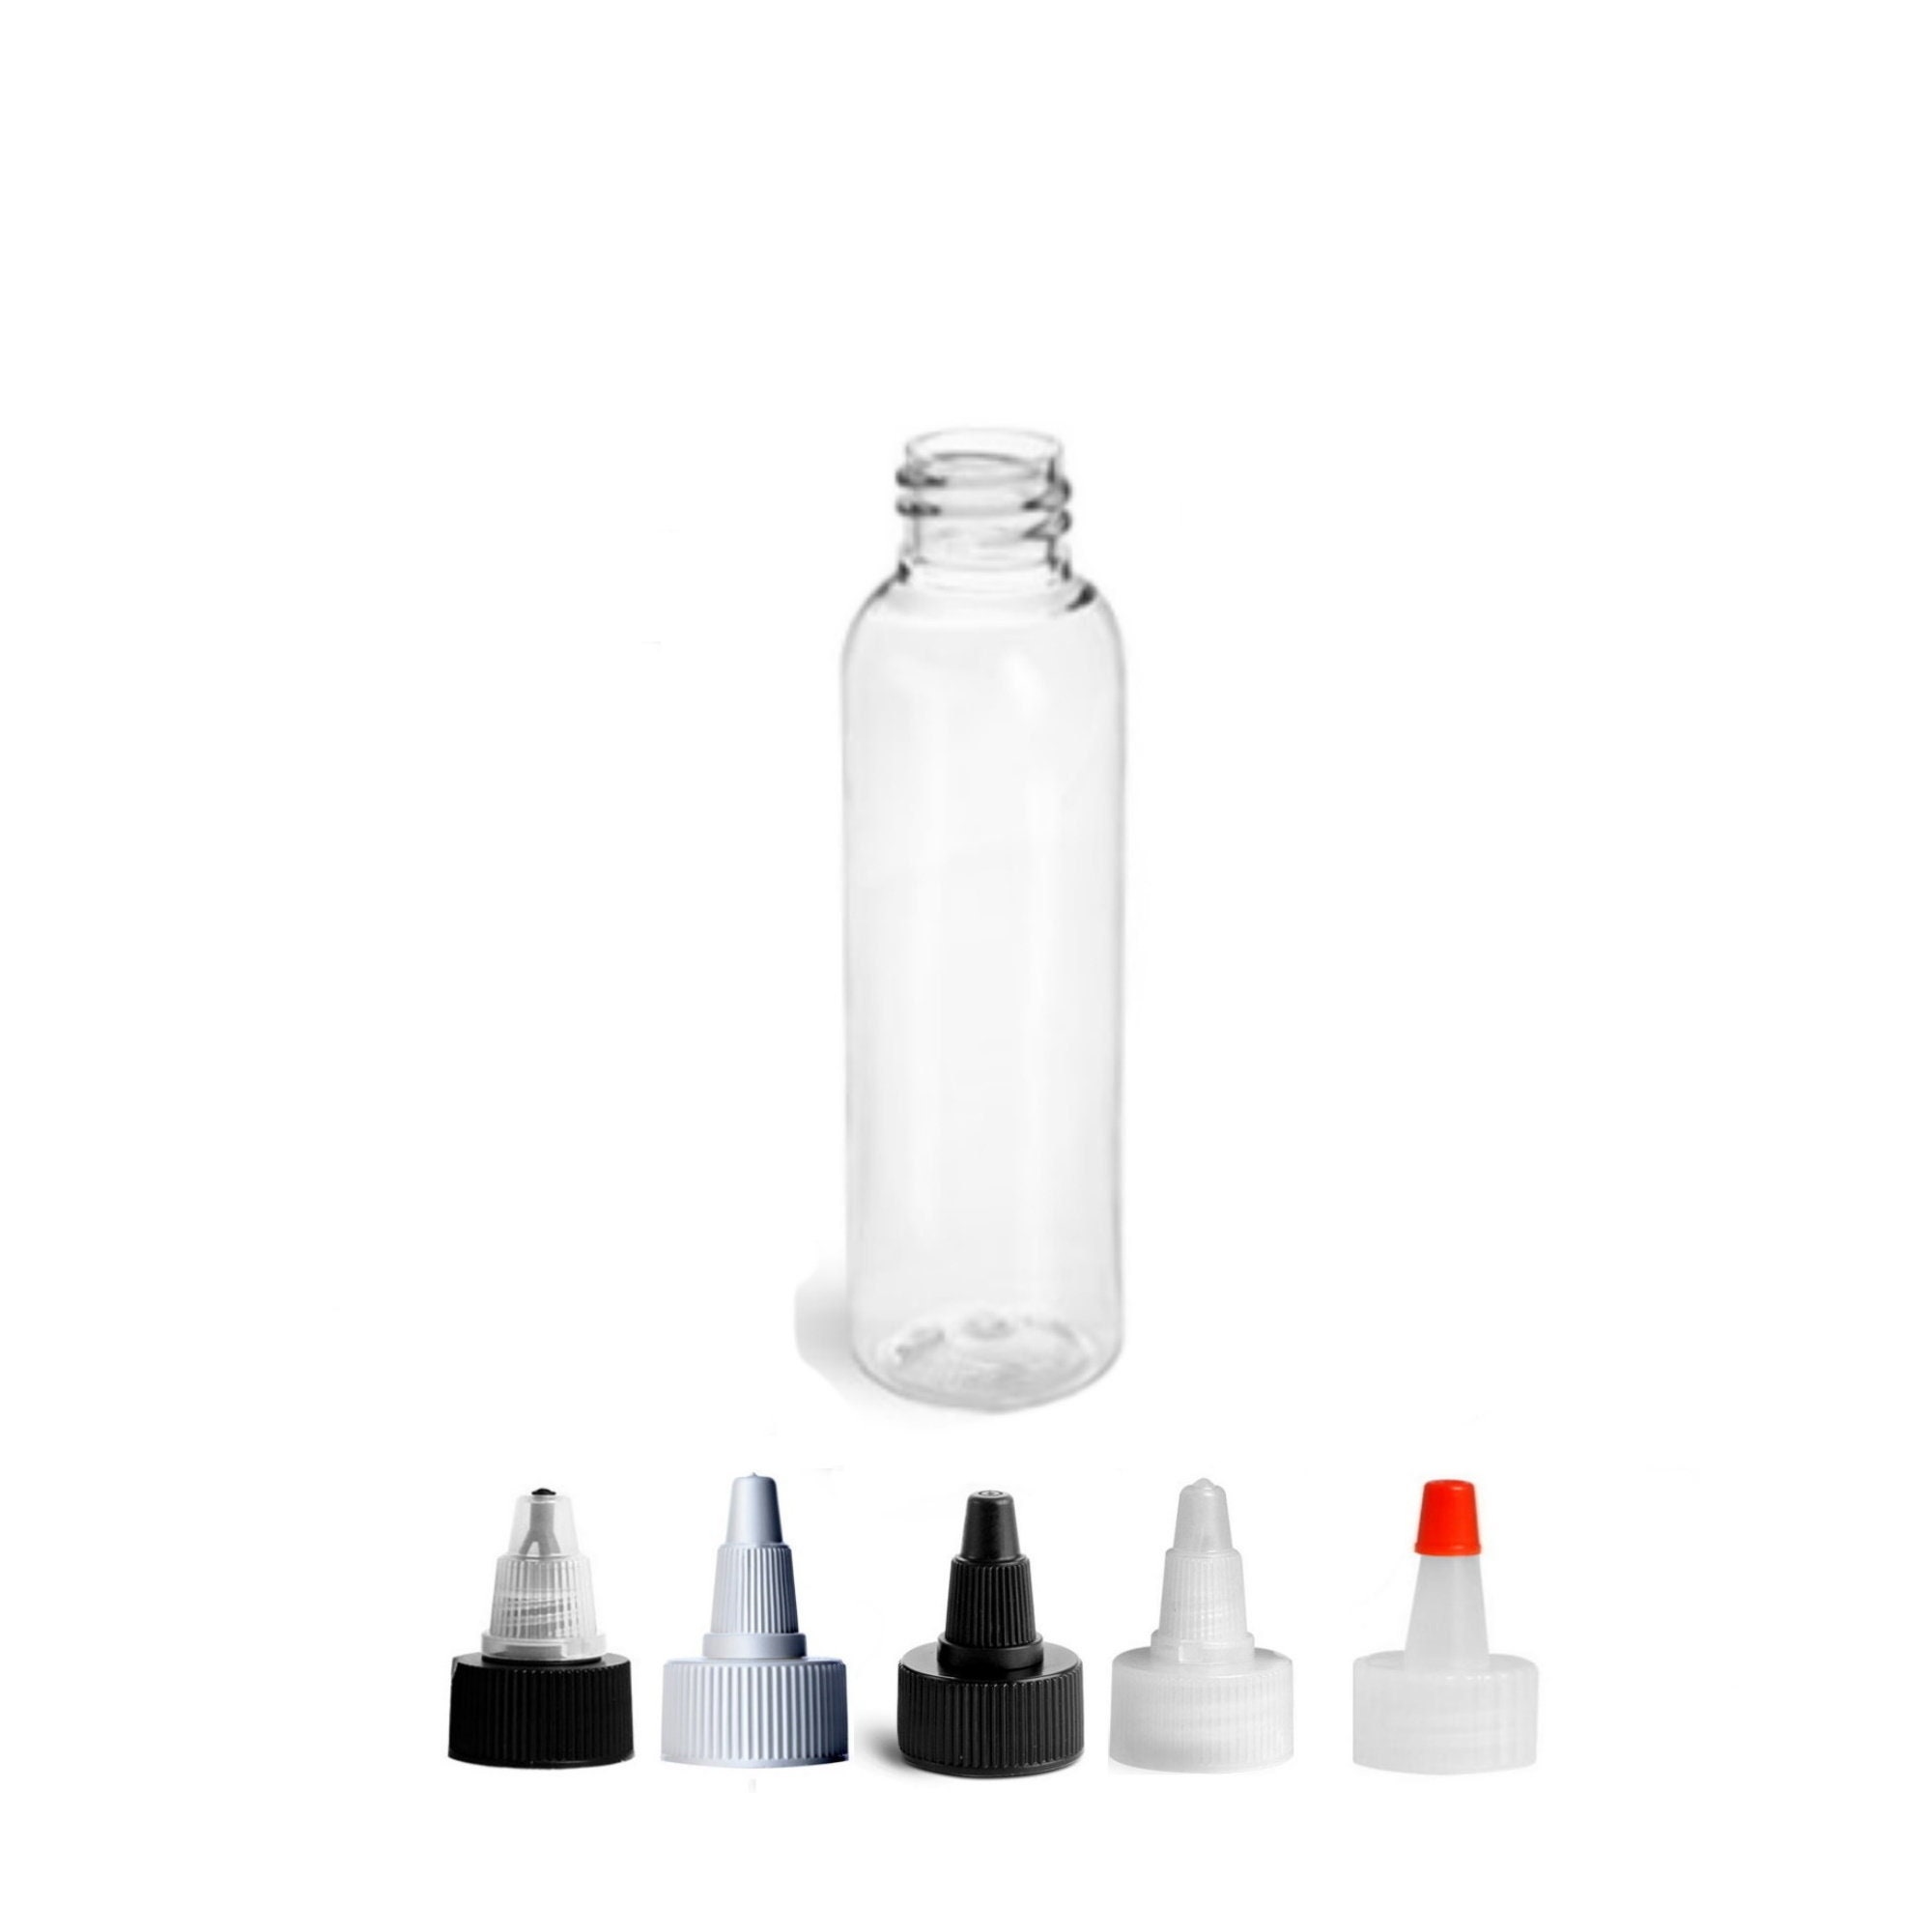 16 Oz Plastic Bottles, Set of 2 Clear Squeeze Bottles With White